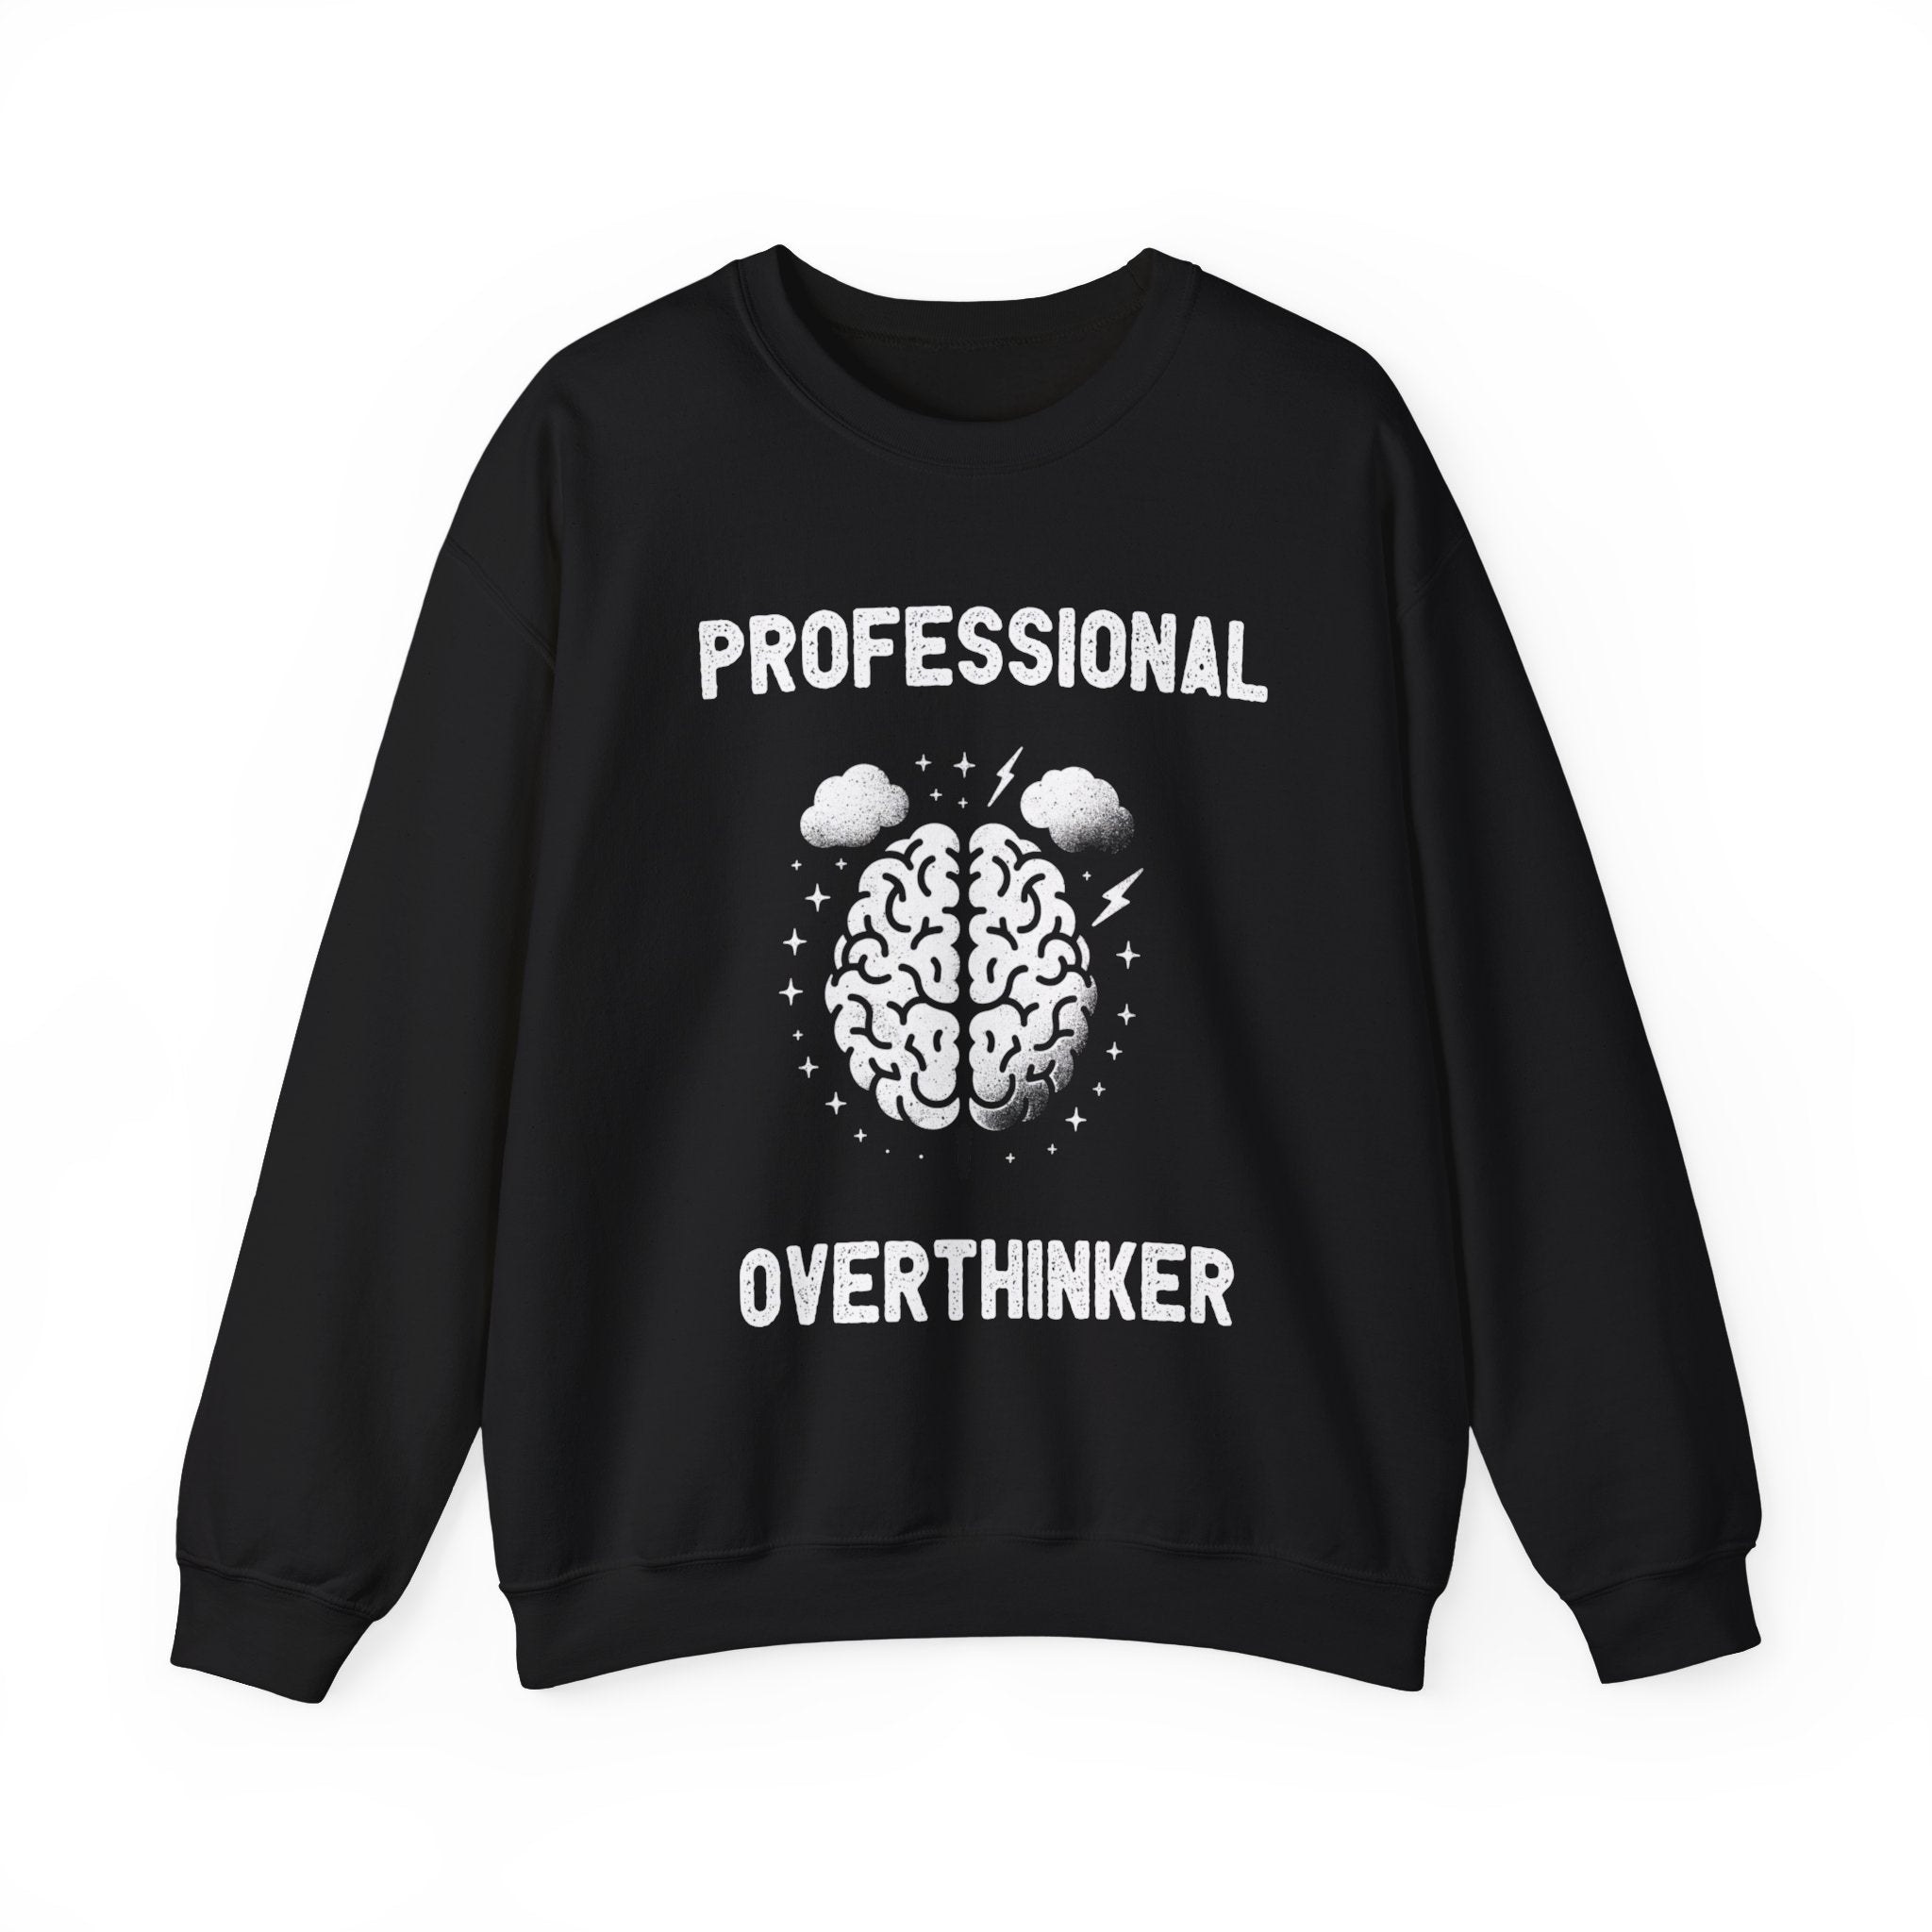 Stay stylish and warm with the Professional Overthinker - Sweatshirt. This black sweatshirt features the text "Professional Overthinker" above and below an illustration of a brain with clouds and lightning bolts, perfect for those colder months.